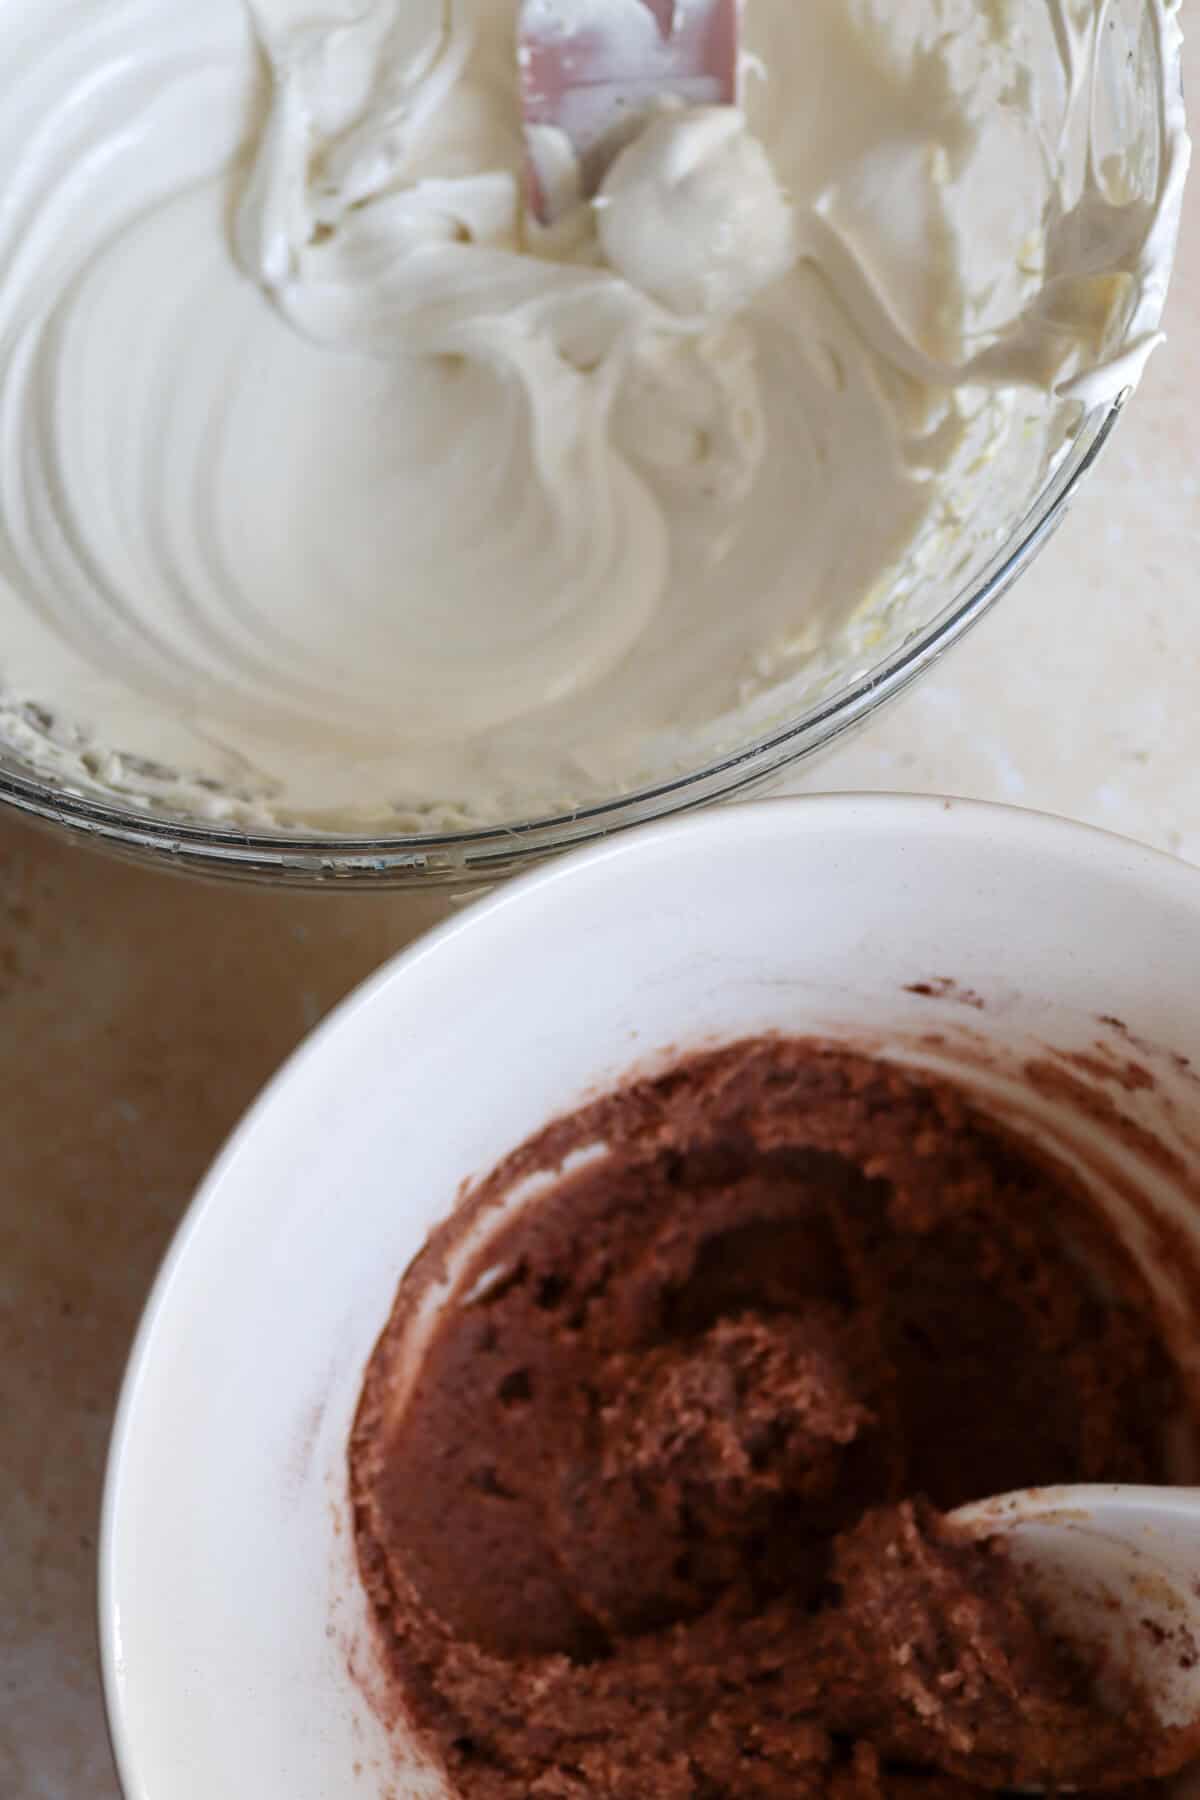 A bowl of Italian meringue next to a bowl of chocolate nut paste.